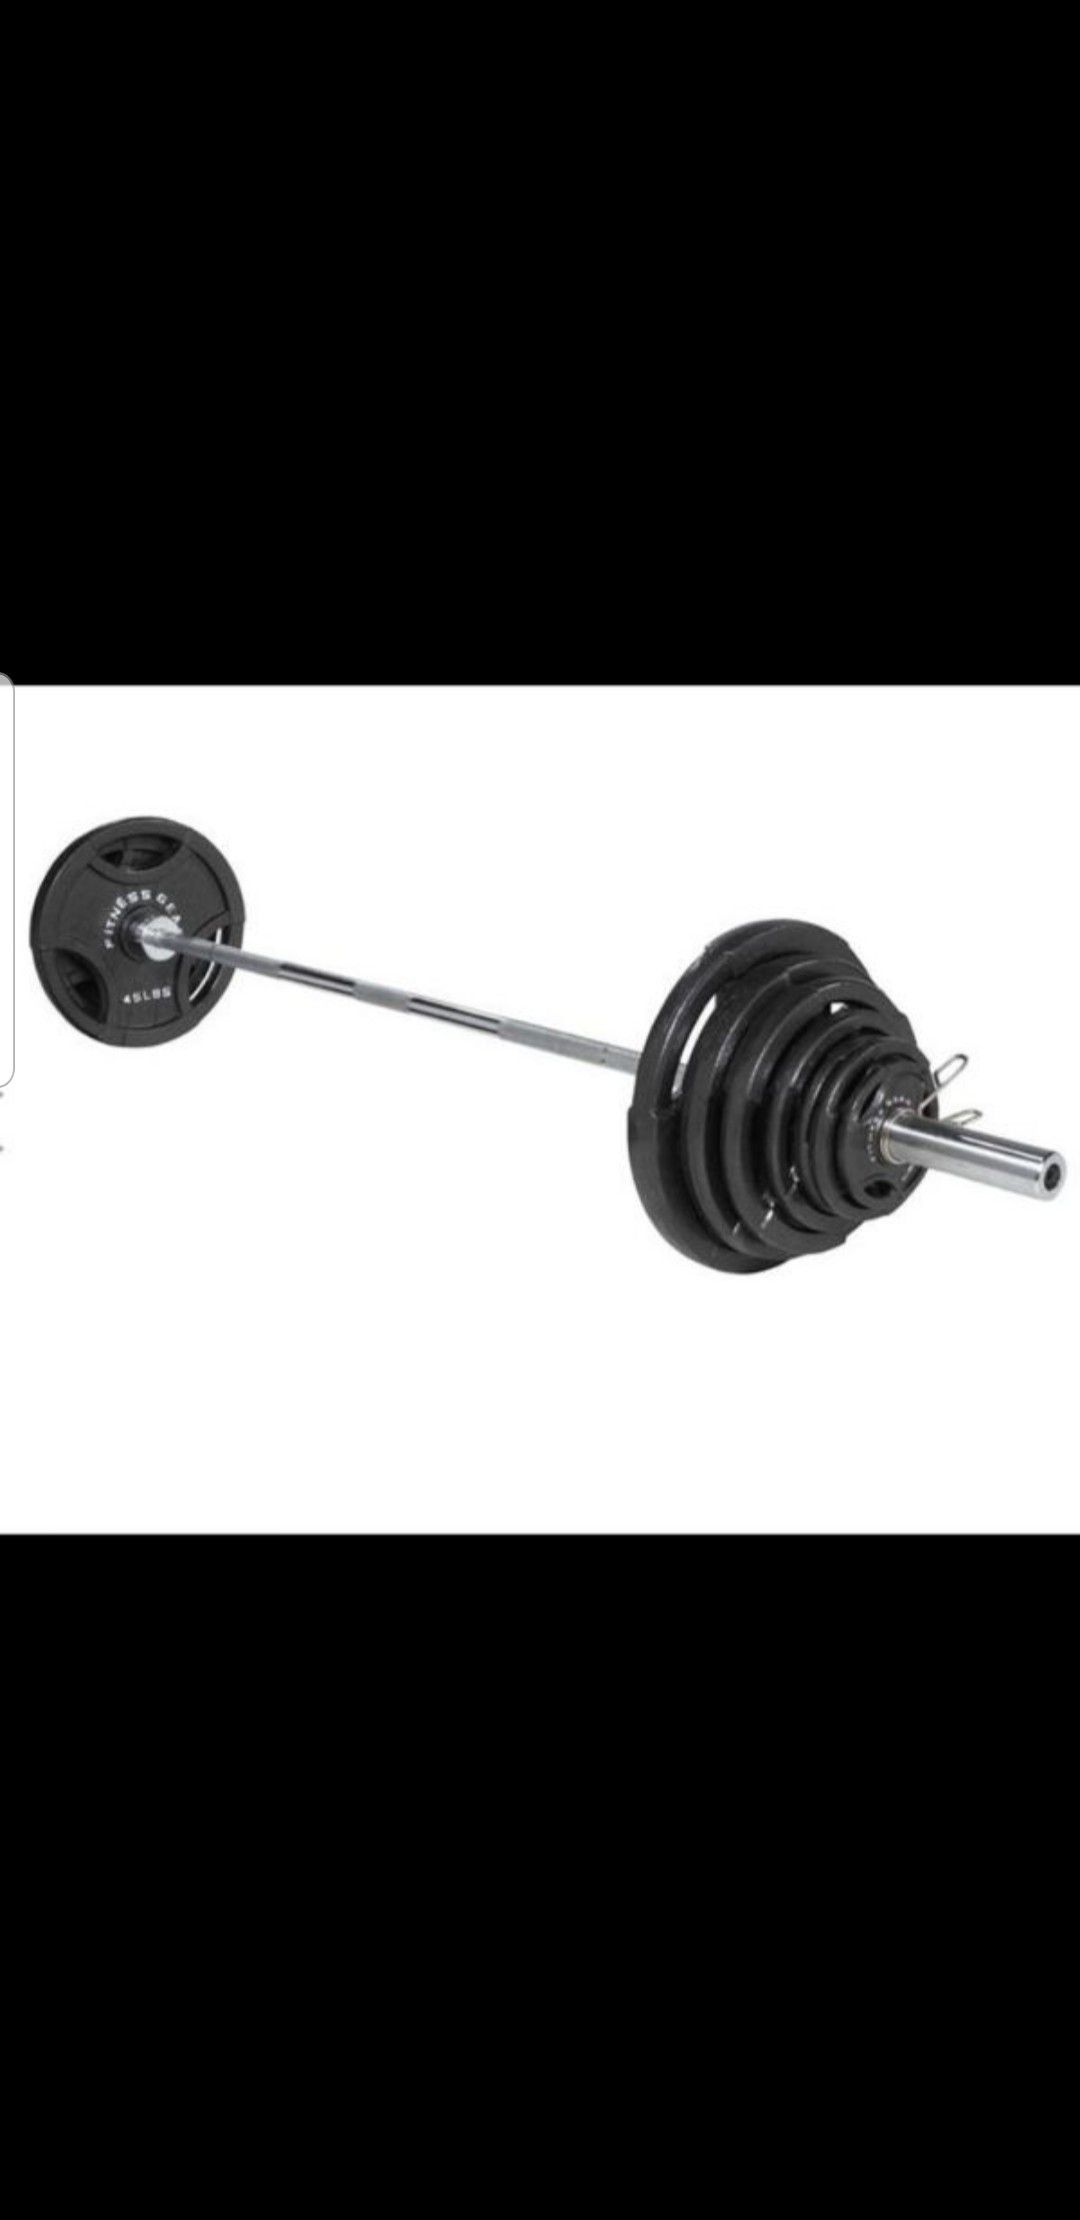 300 lb Olympic weights set